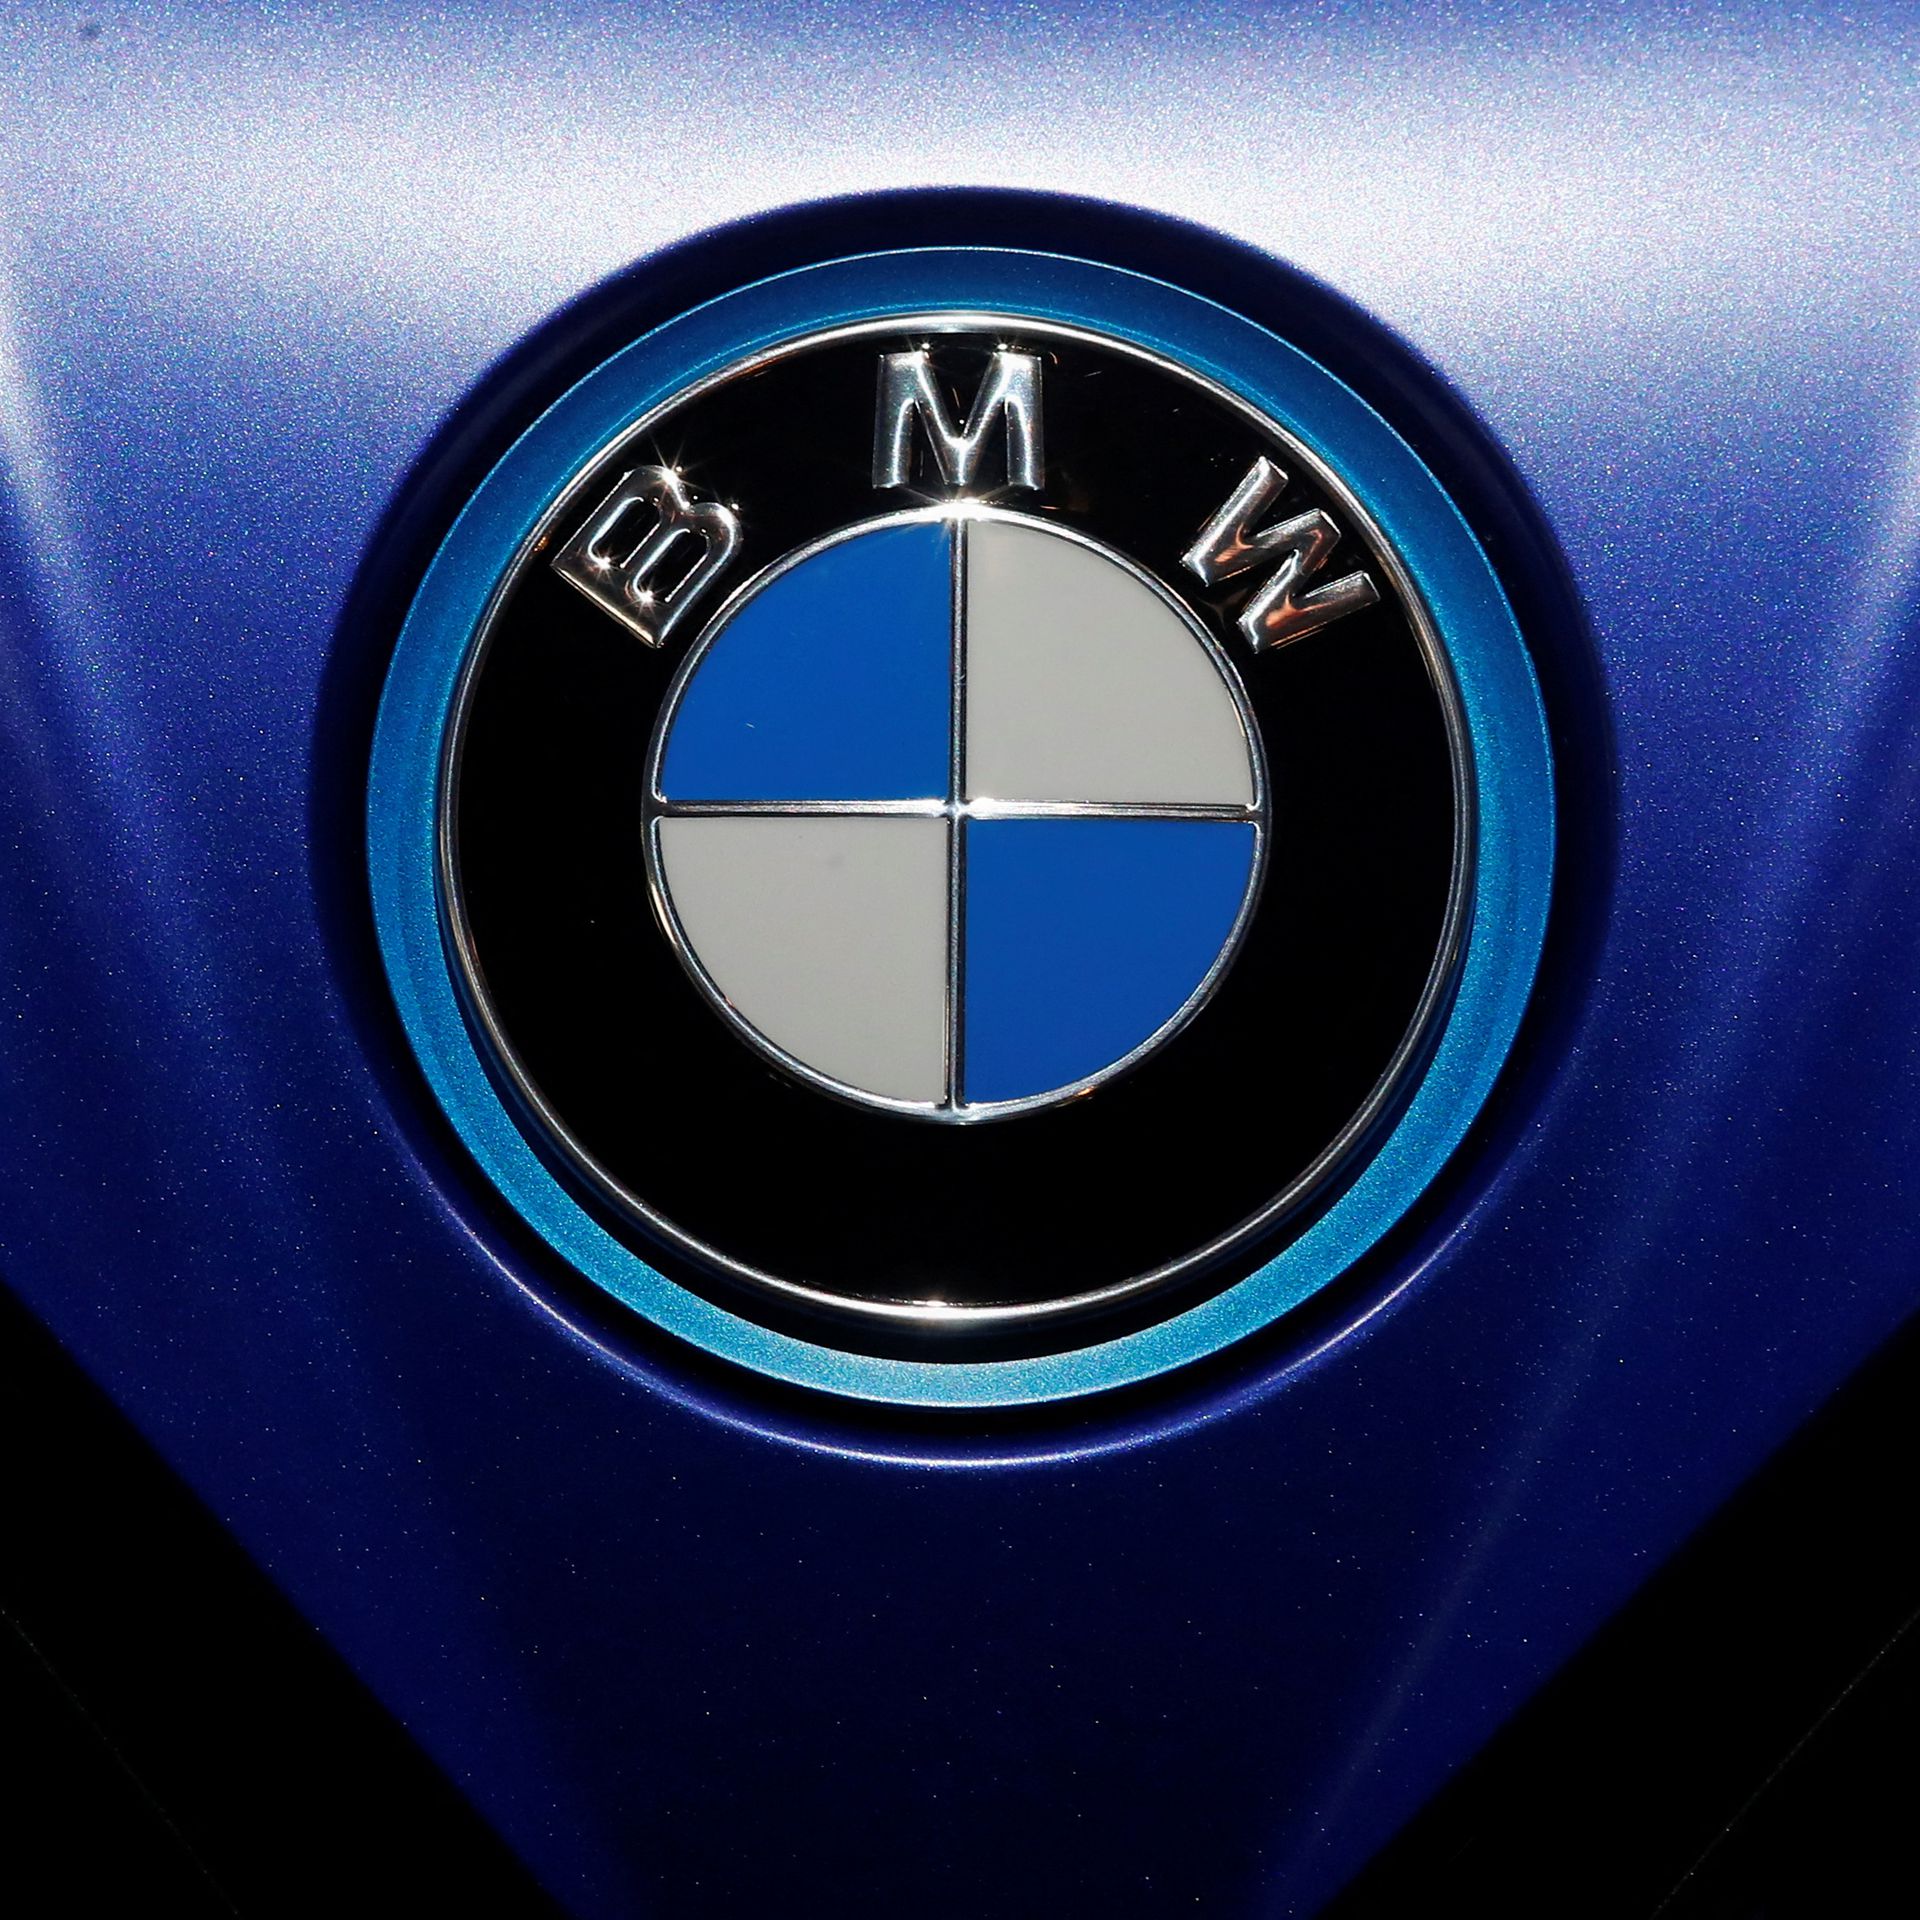 BMW to resume production at some plants | Reuters